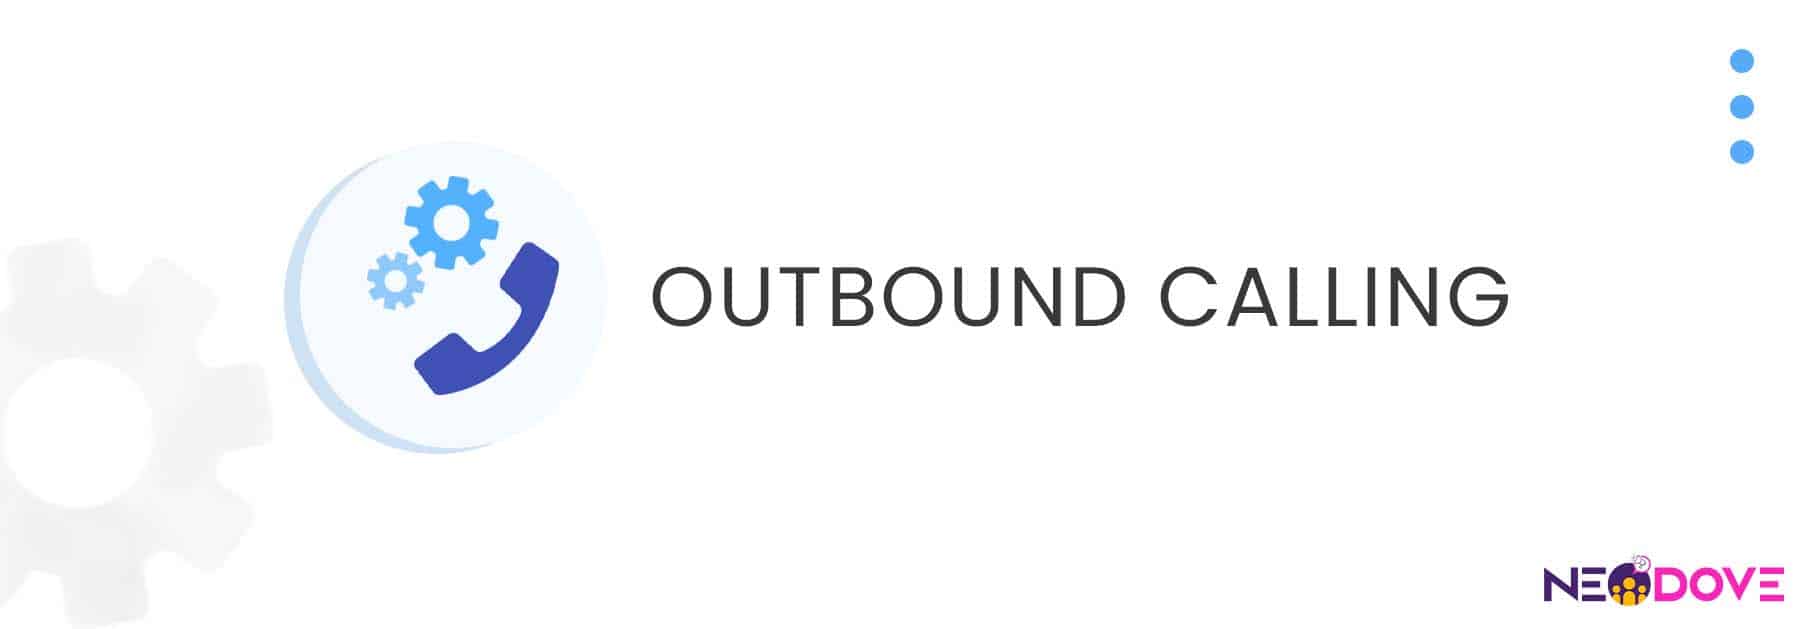 Outbound Calling